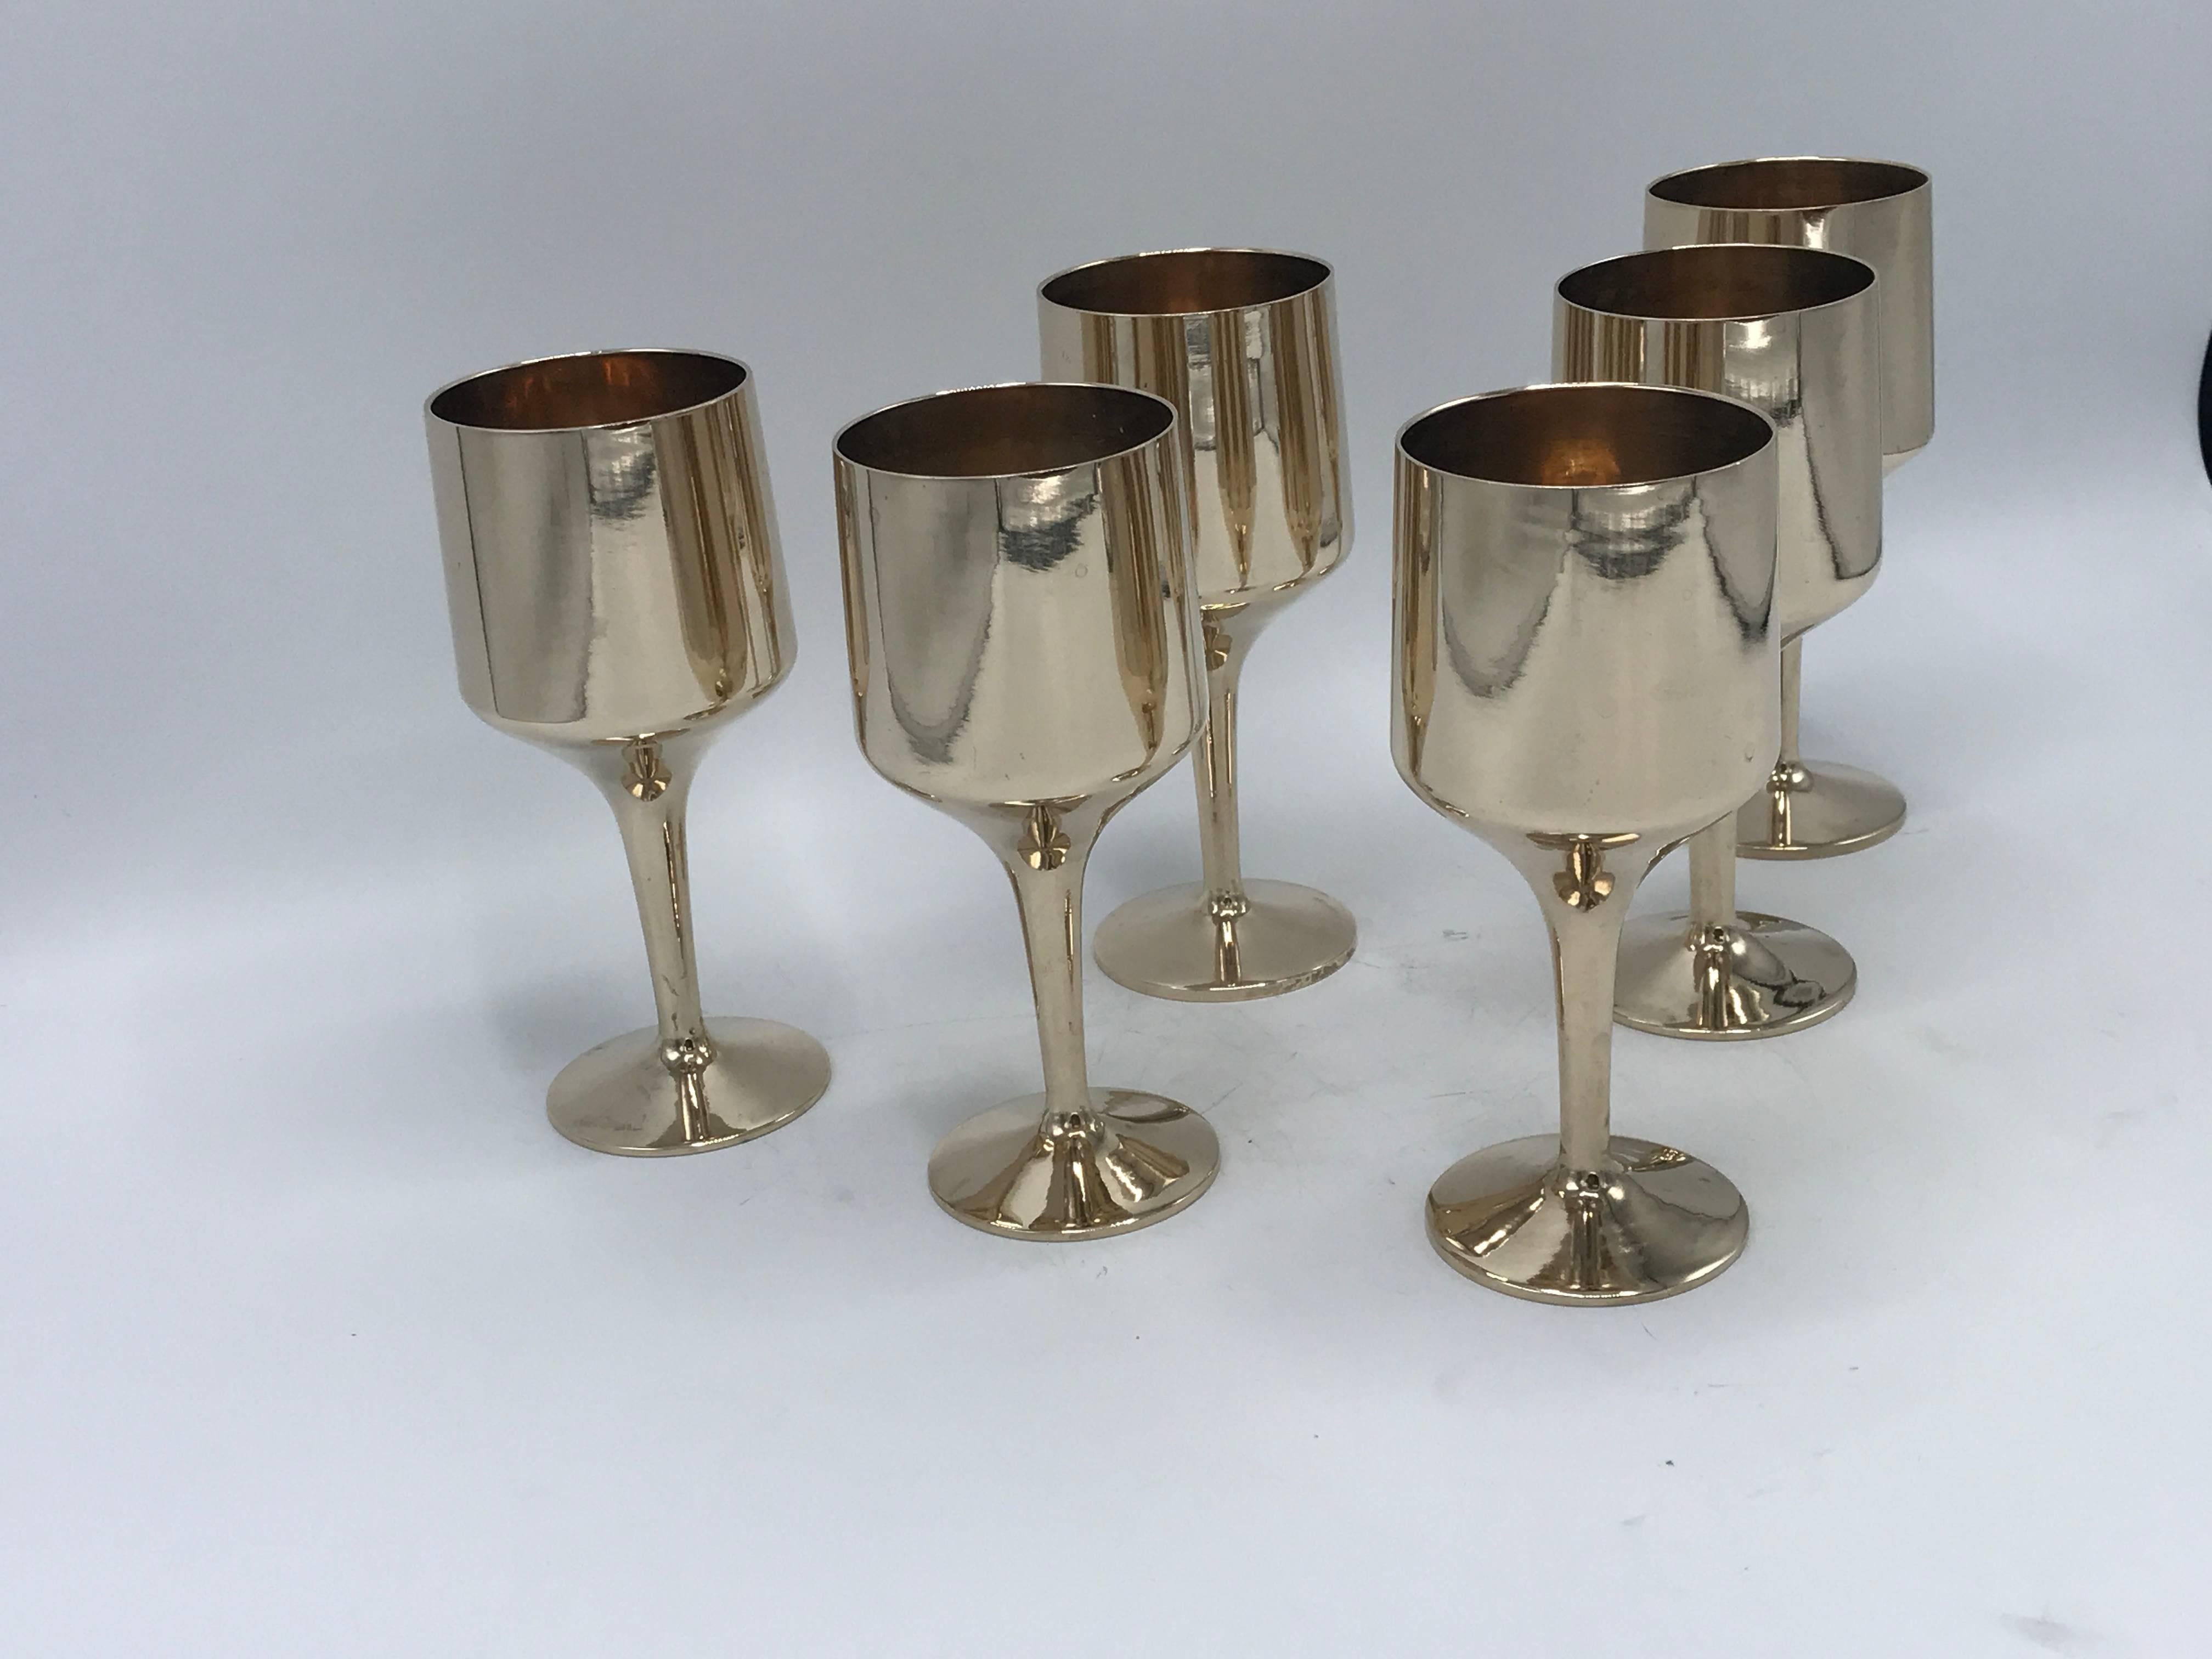 Offered is a fabulous, set of six, 1970s Italian solid-brass goblet wine glasses. Heavy.